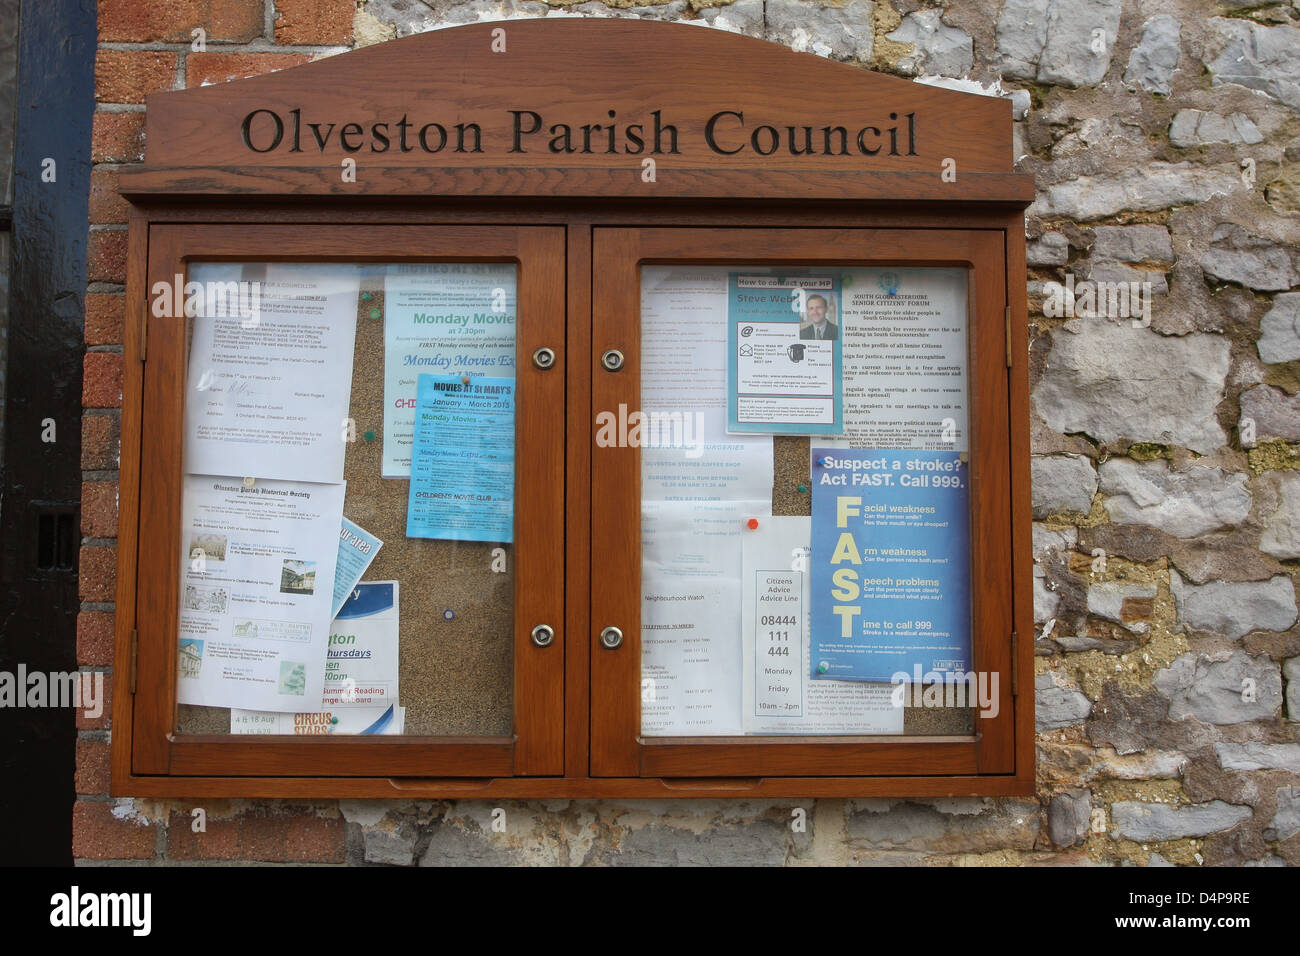 Olveston Parish council notice board advertising events on in the village and other notable happening. February 2013 Stock Photo